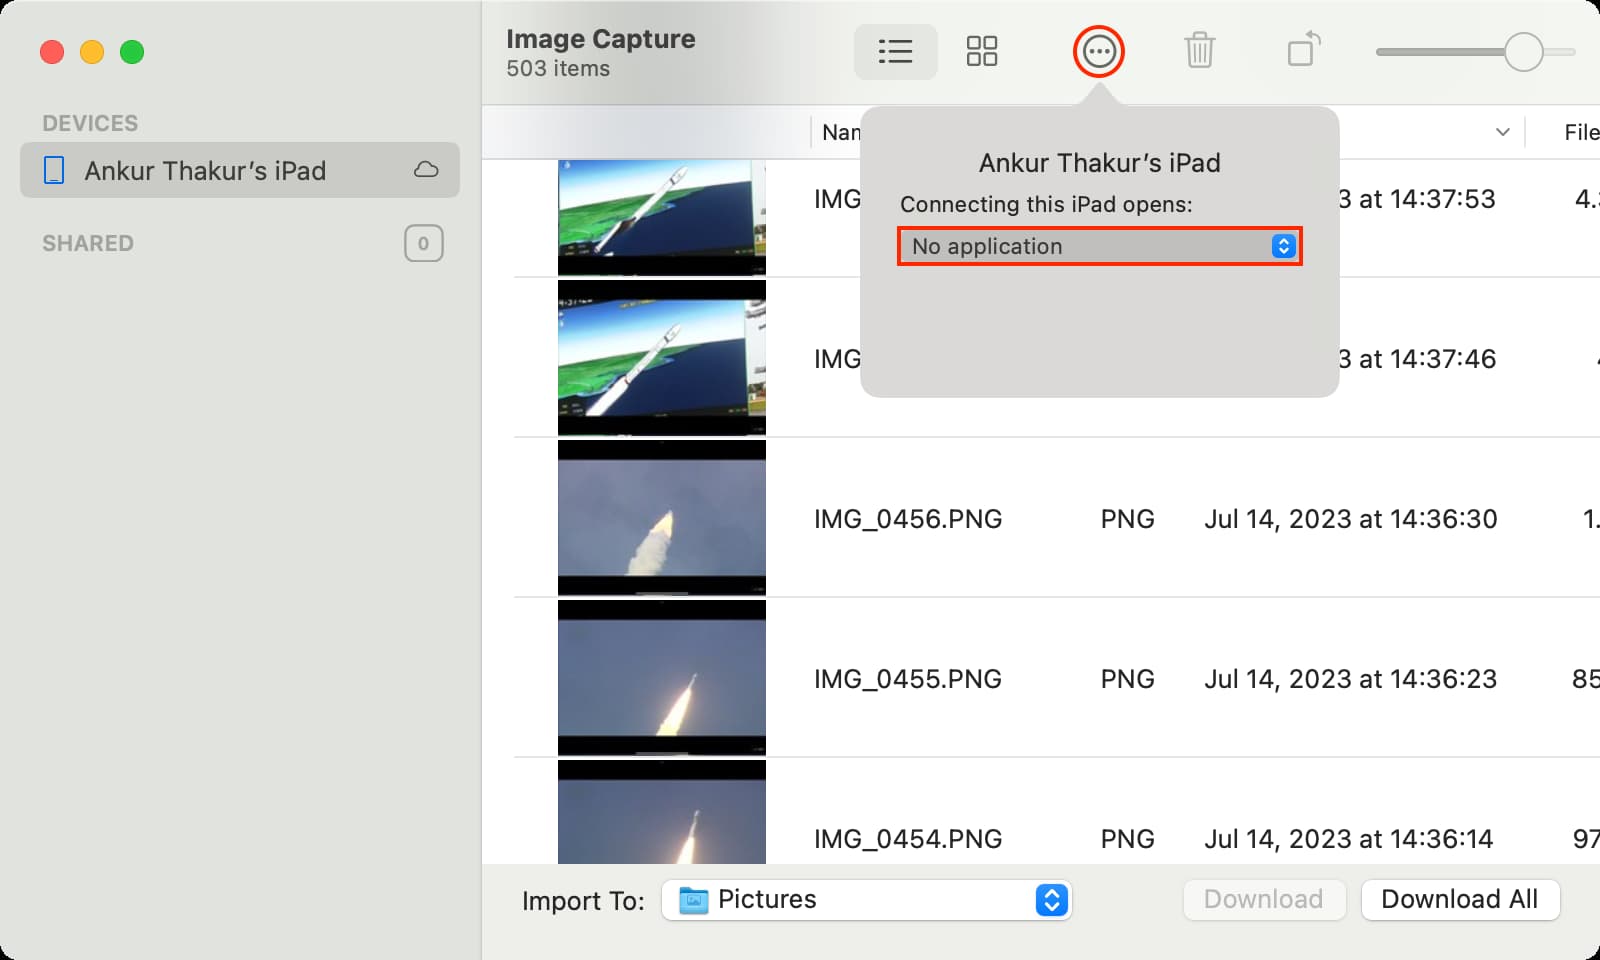 Connecting this device opens option in Image Capture app on Mac